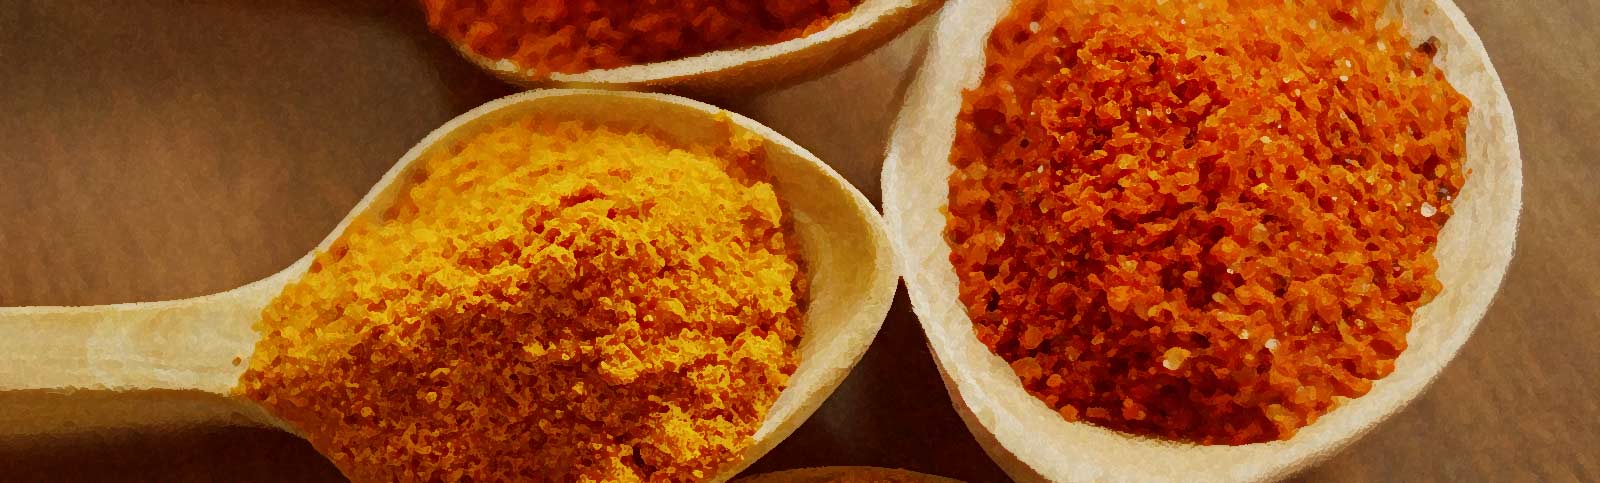 Beauty Made Easy: Involving Turmeric in Your Self Care Regimen